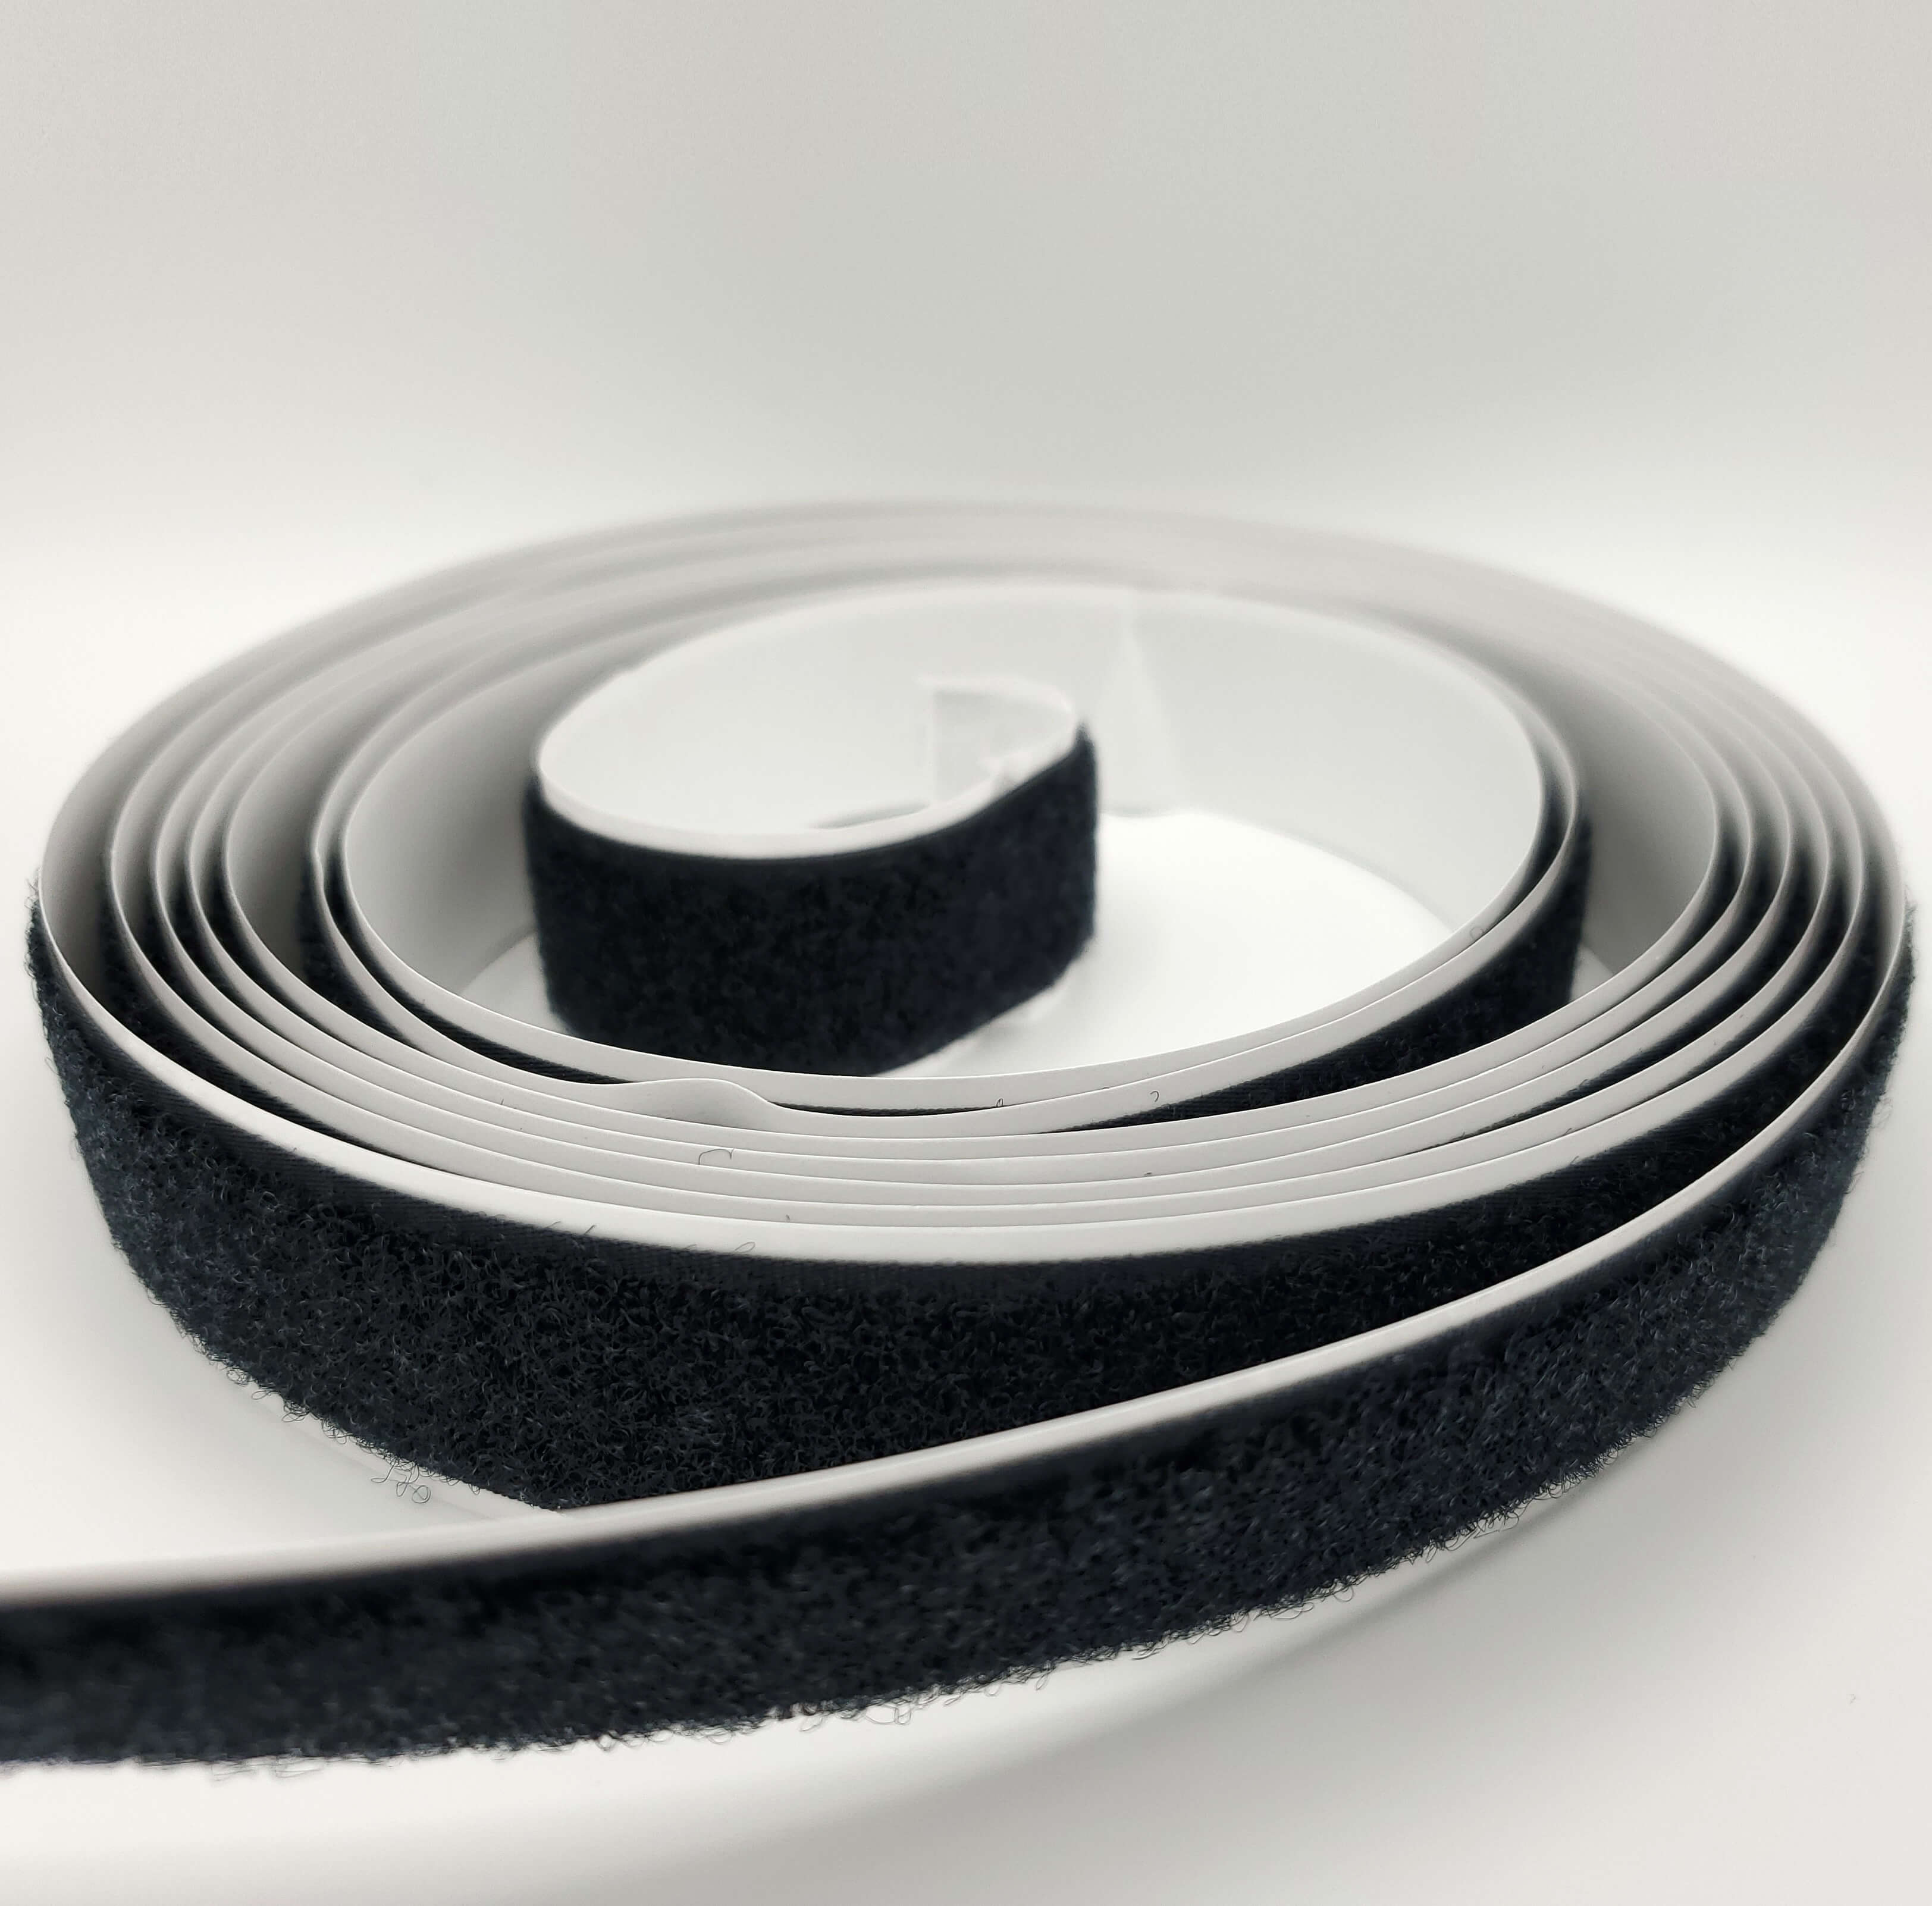 VELCRO Tape with High Tack 75 Adhesive Backing